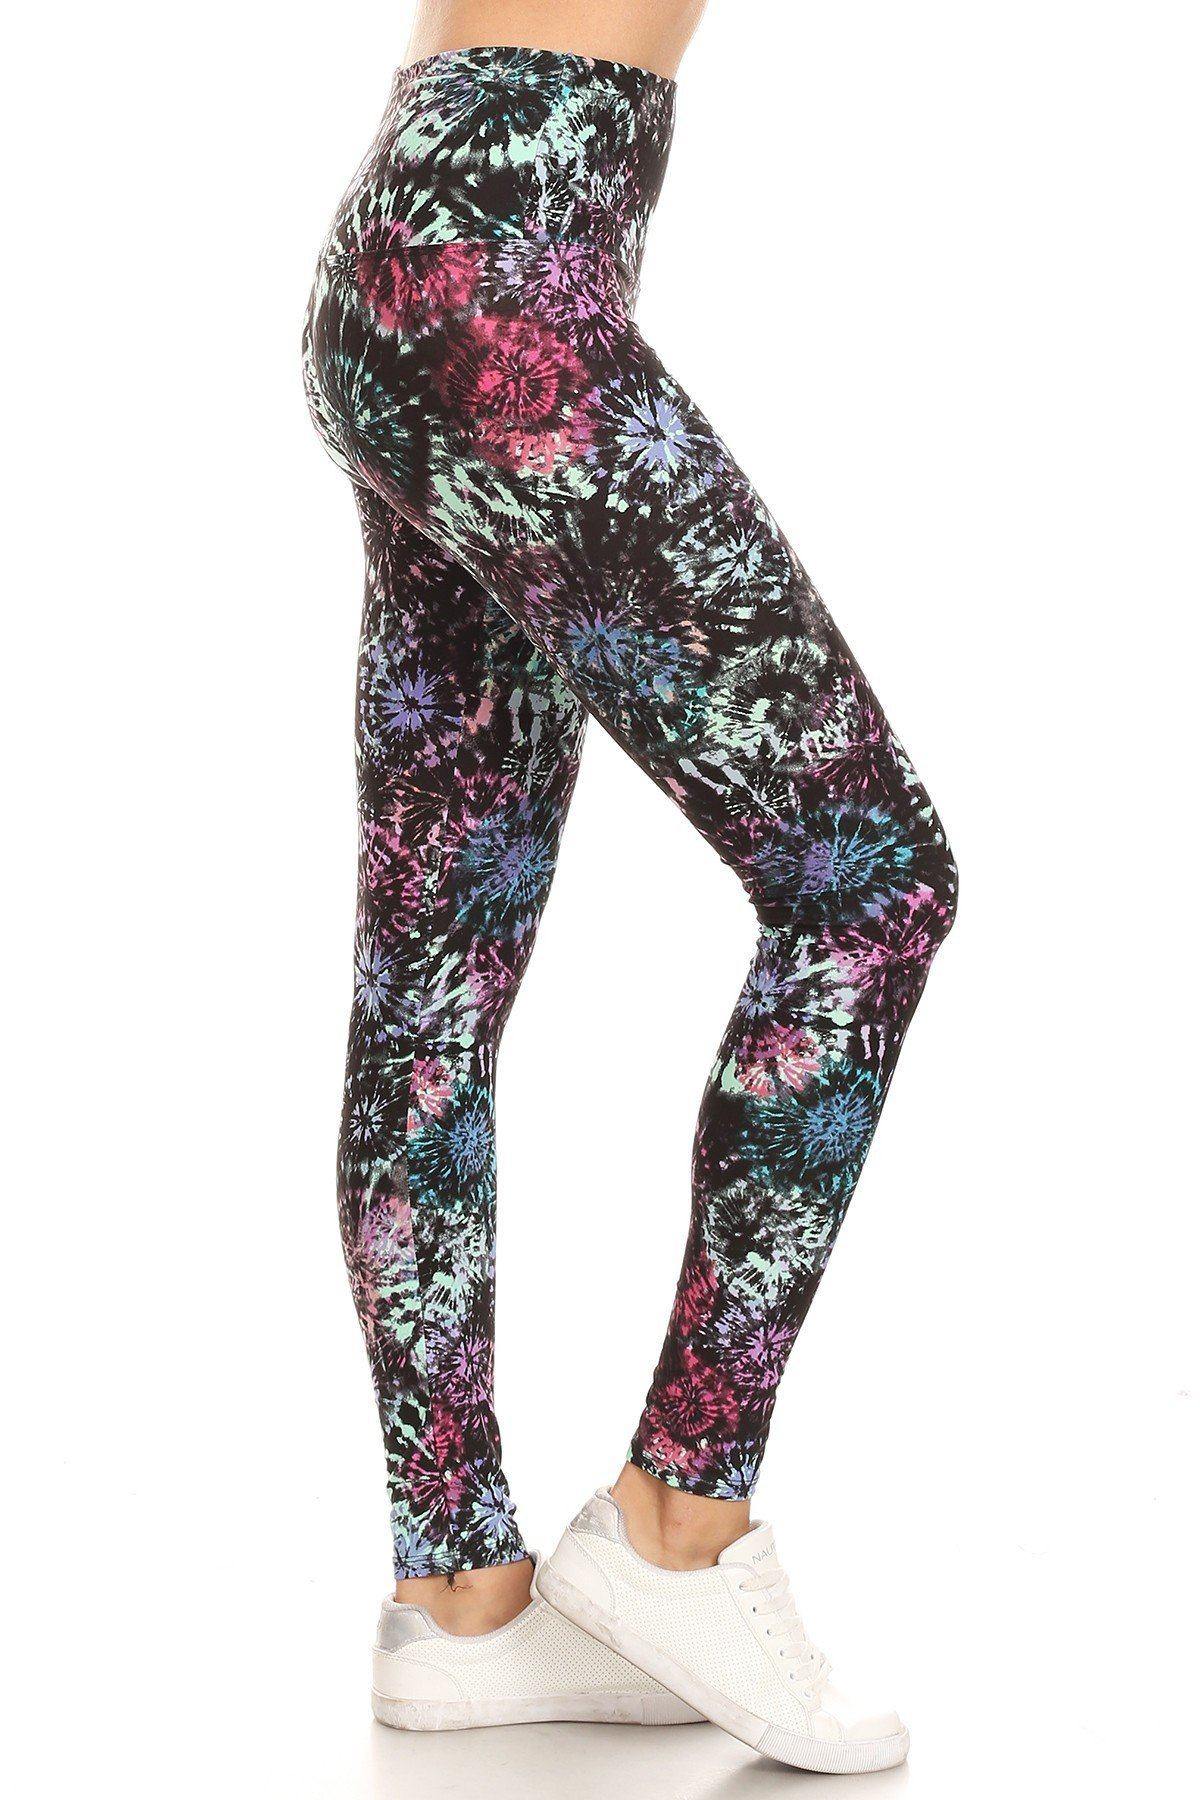 5-inch Long Yoga Style Banded Lined Tie Dye Printed Knit Legging With High Waist. - Pearlara